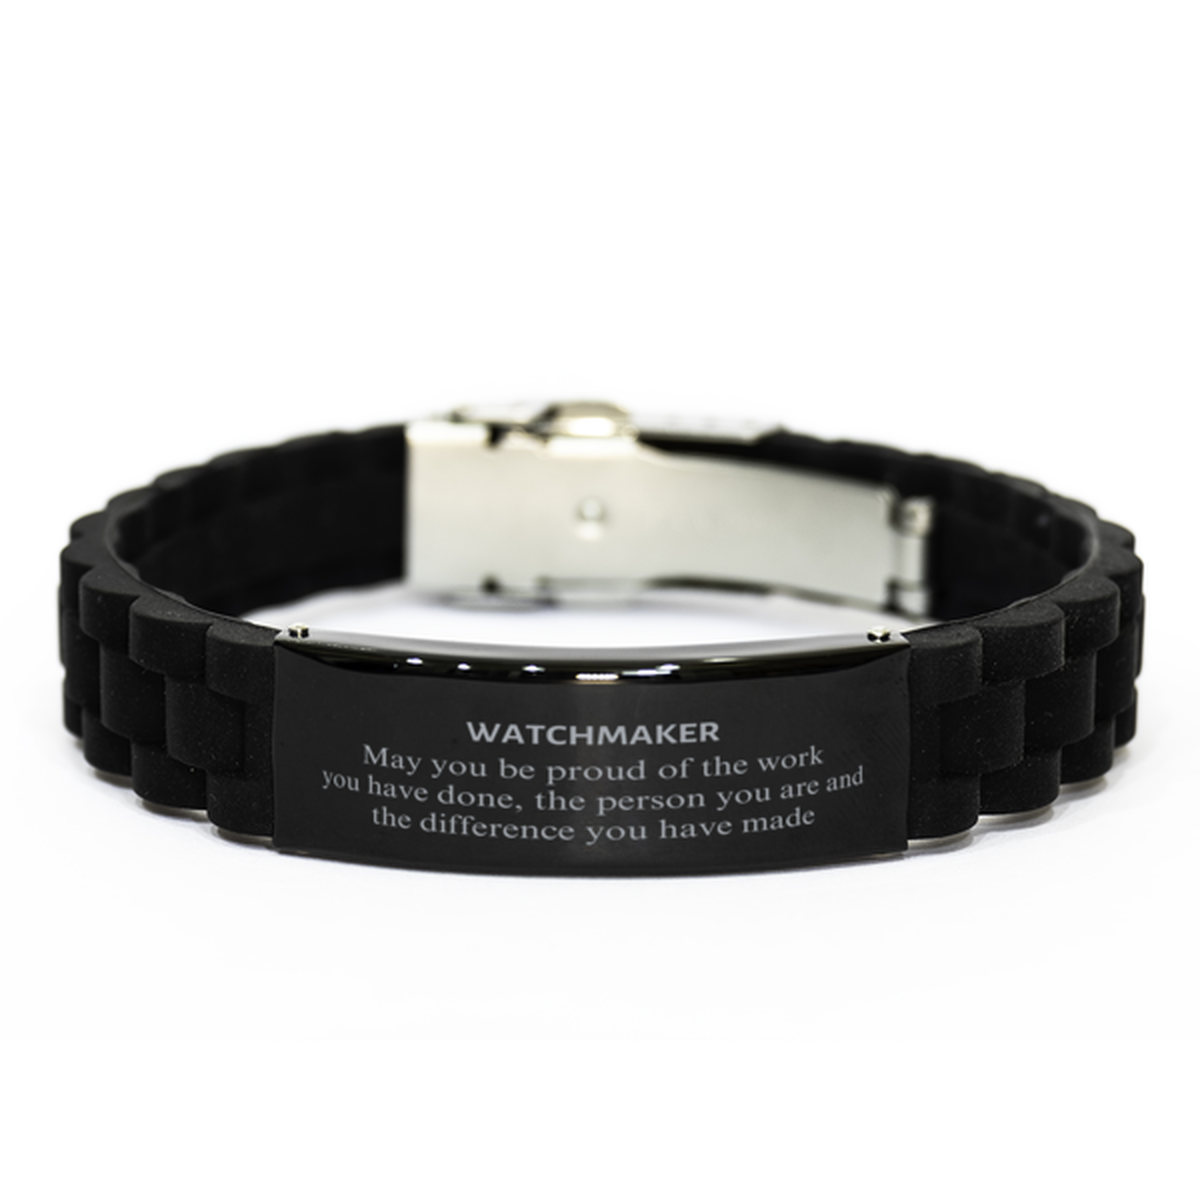 Watchmaker May you be proud of the work you have done, Retirement Watchmaker Black Glidelock Clasp Bracelet for Colleague Appreciation Gifts Amazing for Watchmaker